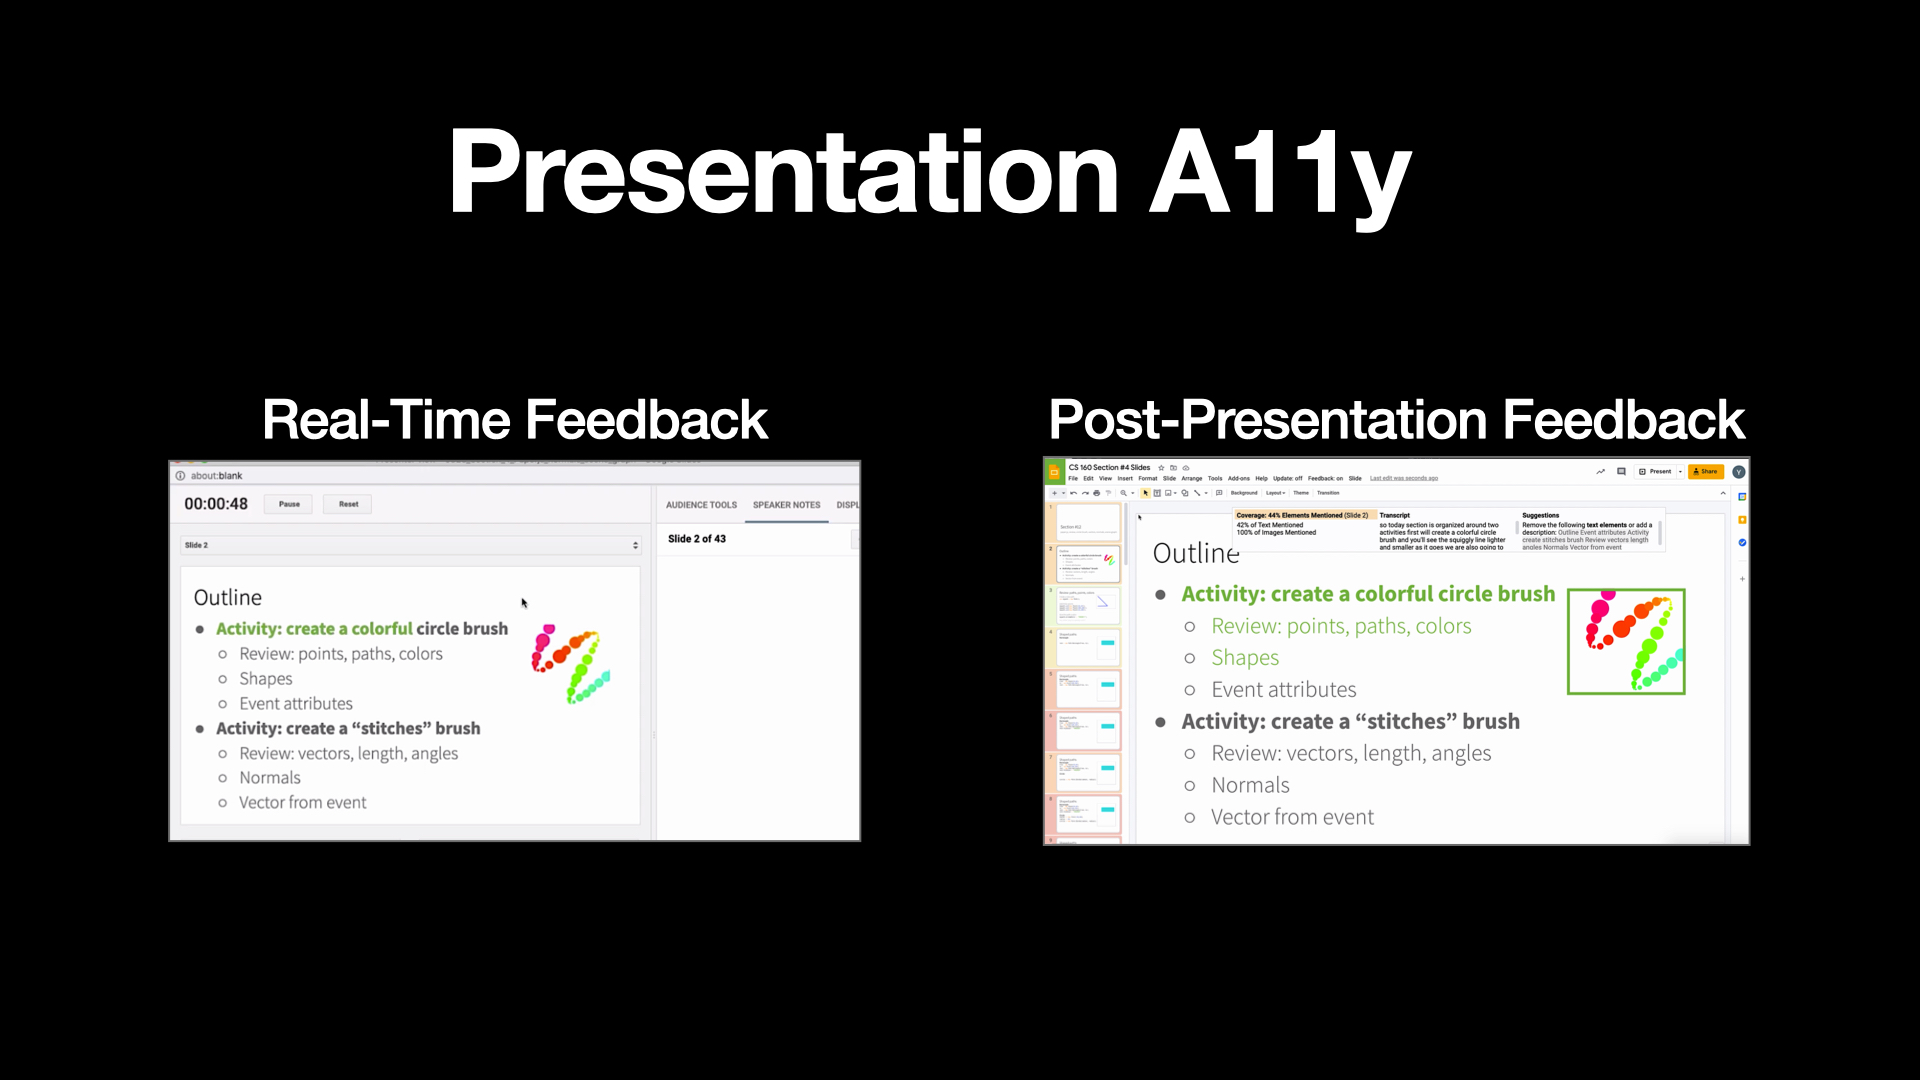 A slide shows the overview of our system. Title text “Presentation A11y” put at the top center of the slide. Below it are the screenshots of two interfaces. On the left is the screenshot of our real-time interface with text “Real-Time Feedback” on its top. On the right is the screenshot of our post-presentation interface with text “Post-Presentation Feedback” on its top.